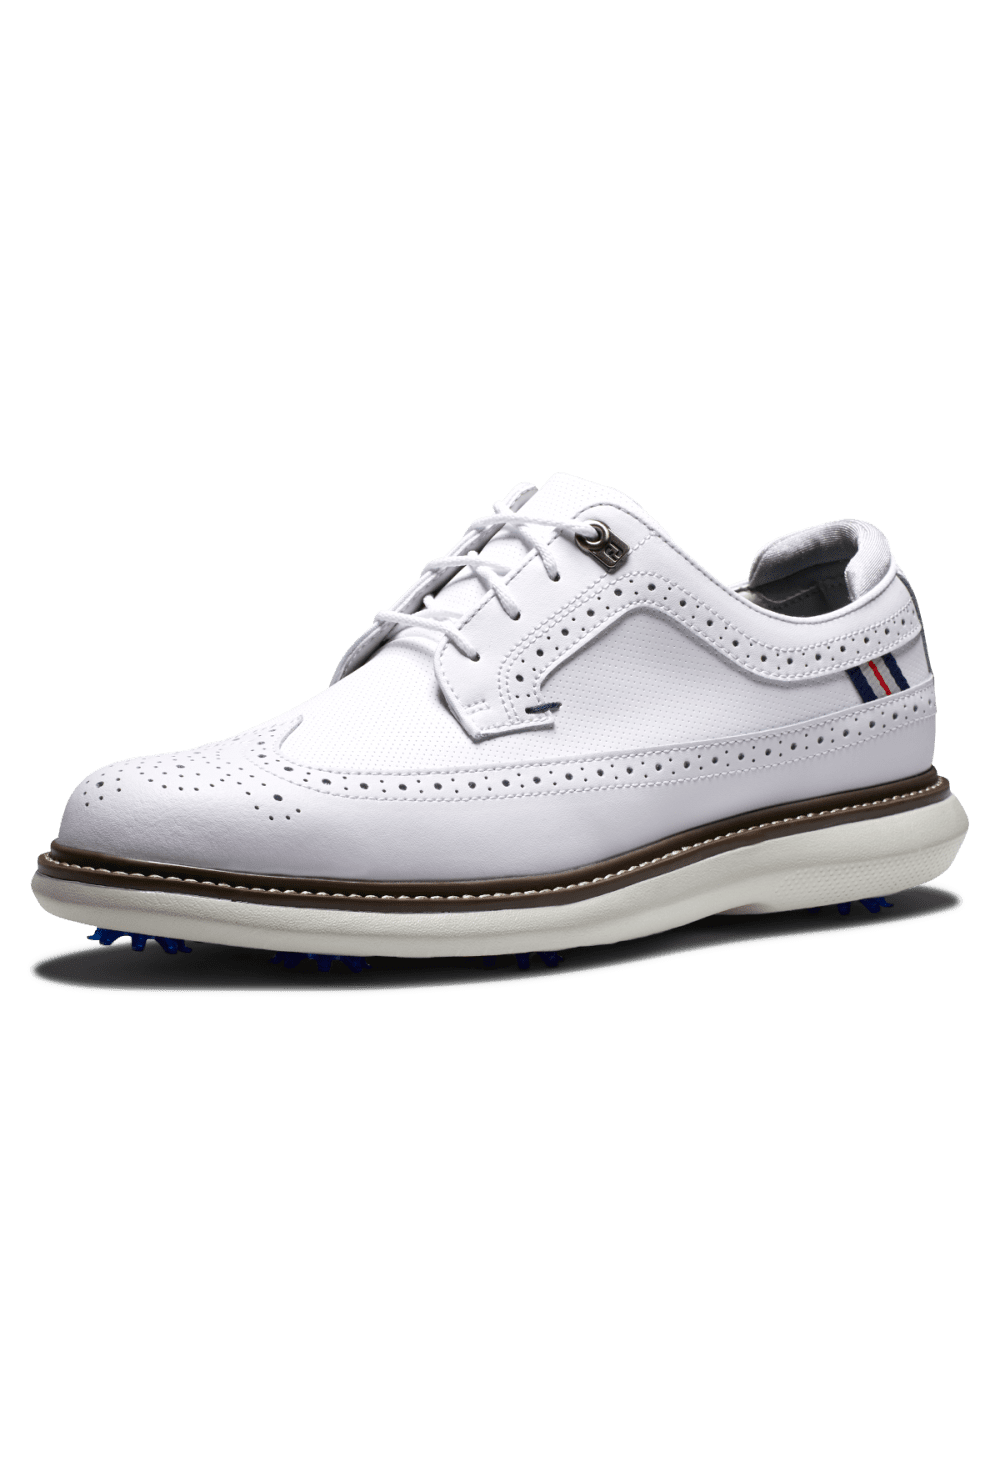 FootJoy Traditions Golf Shoes 57910